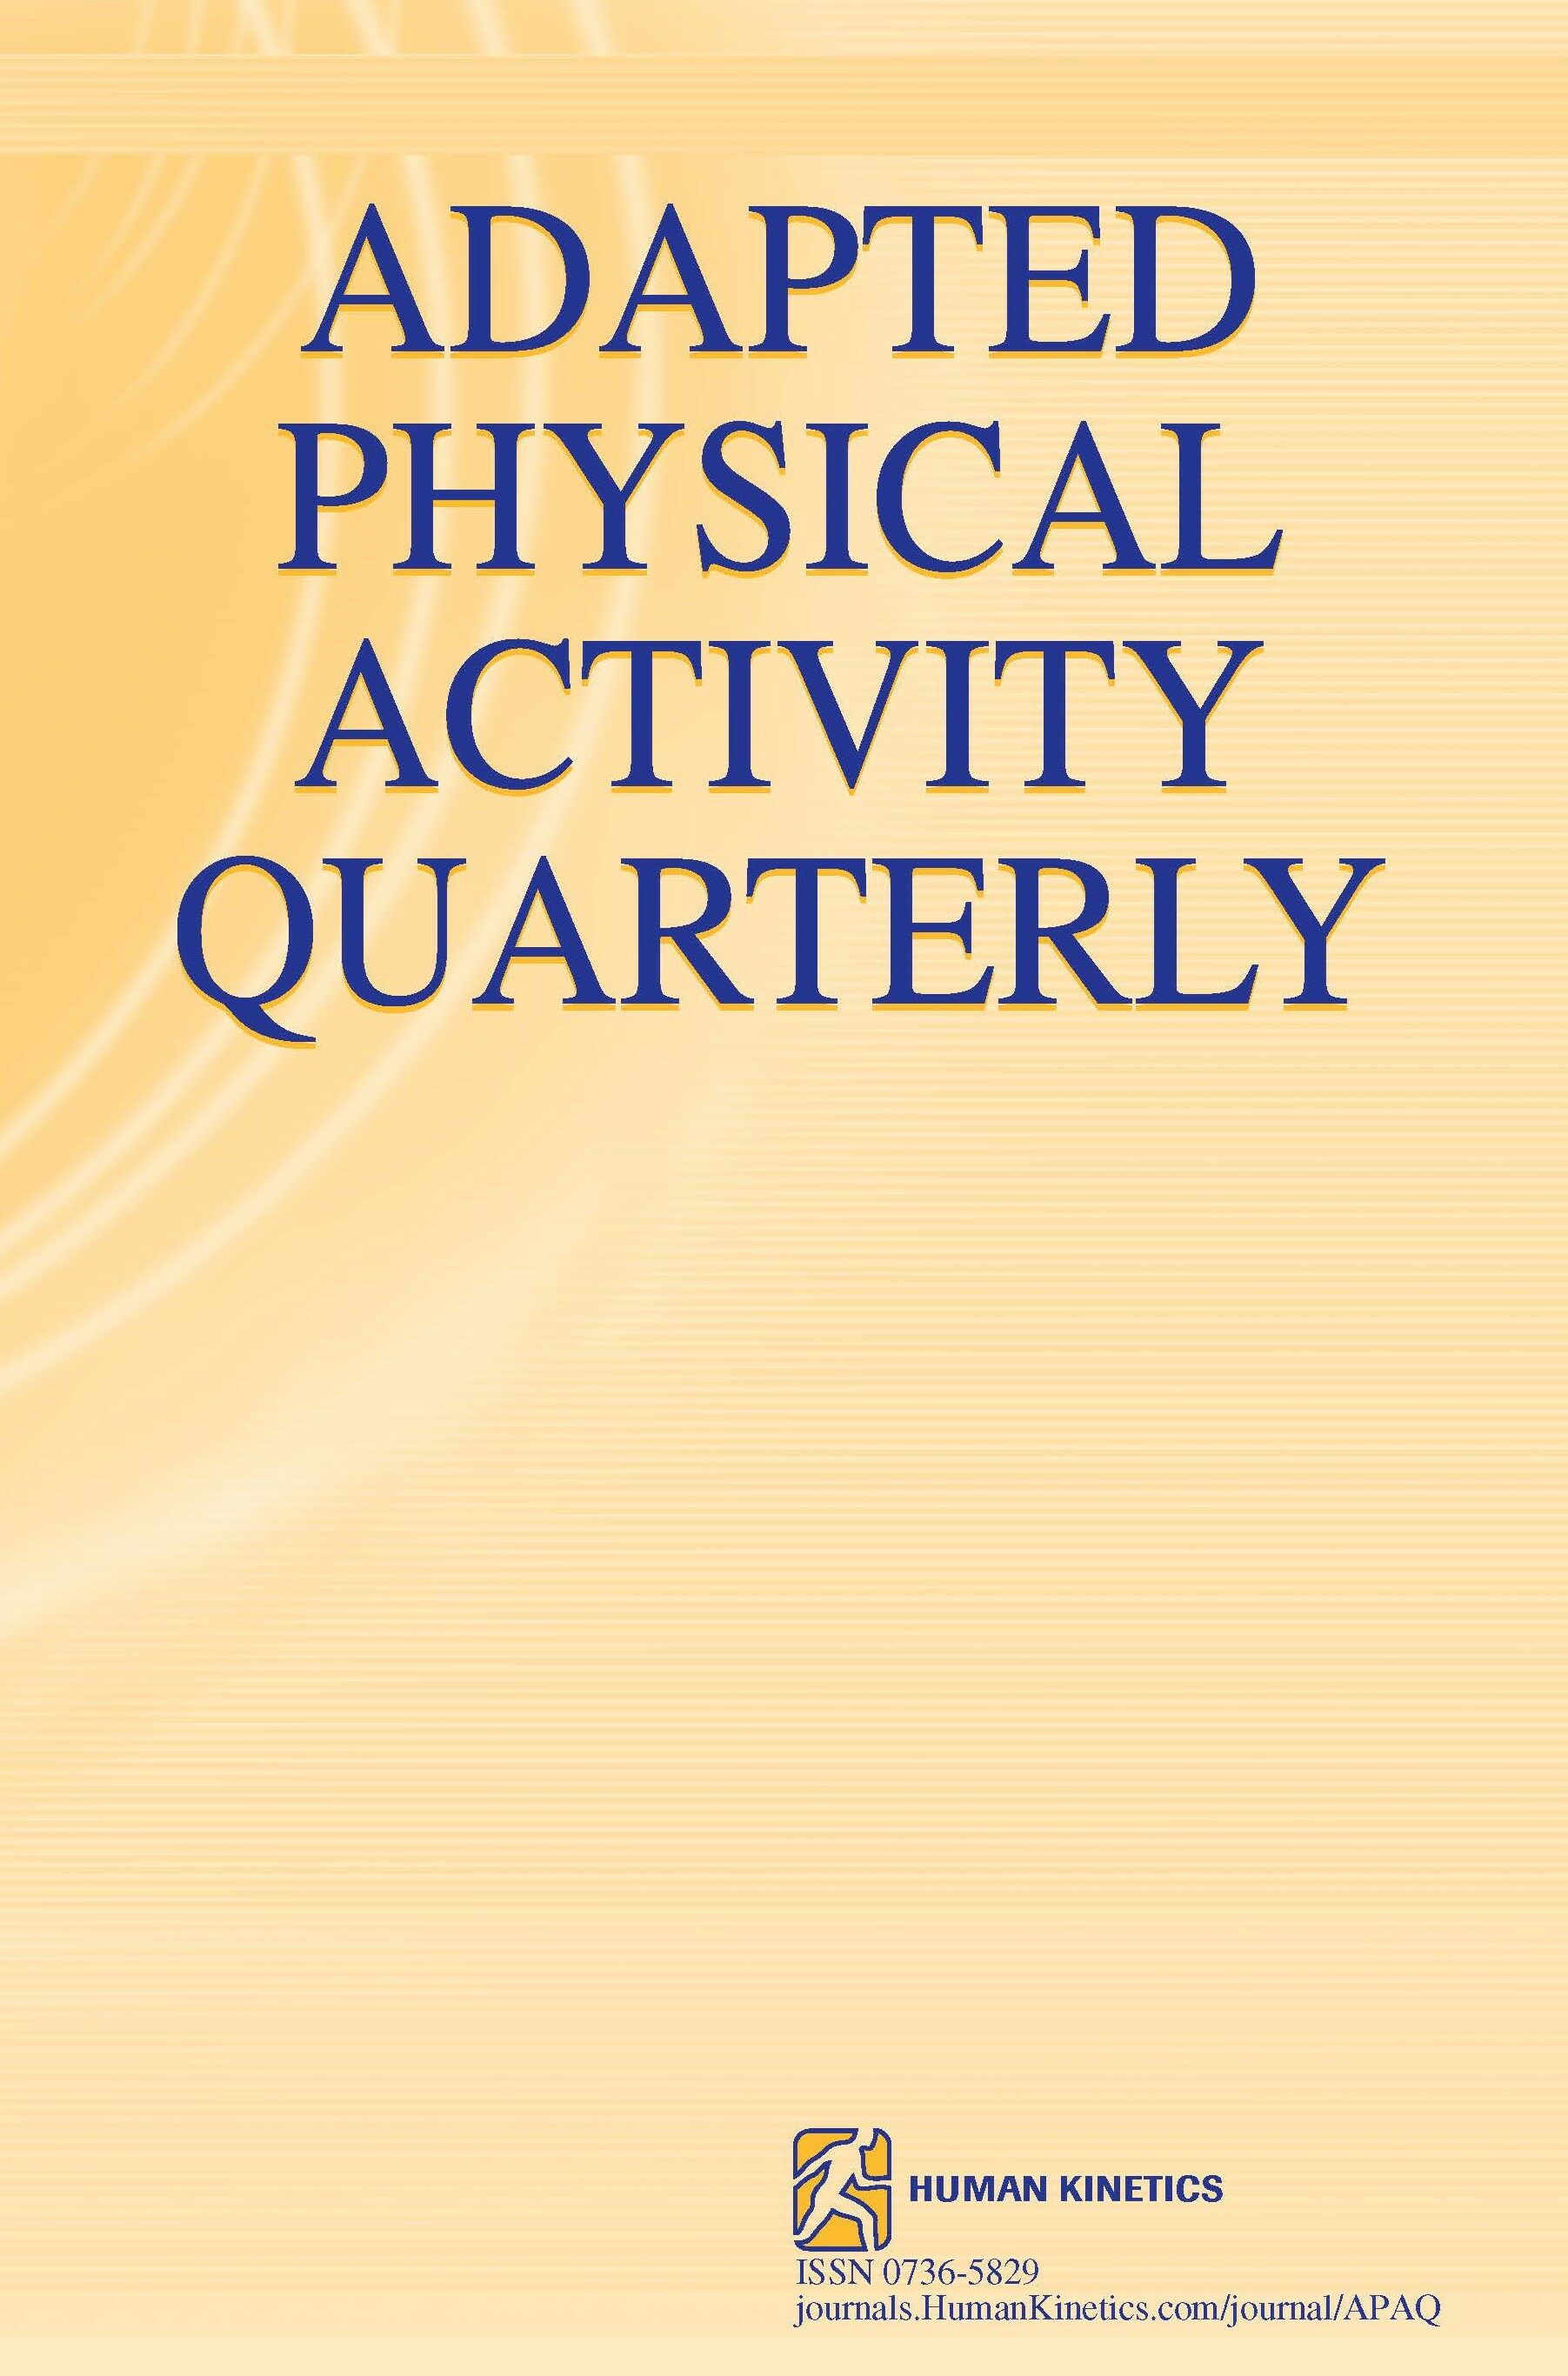 Evidence-Informed Recommendations for Community-Based Organizations Developing Physical Activity Information Targeting Families of Children and Youth With Disabilities